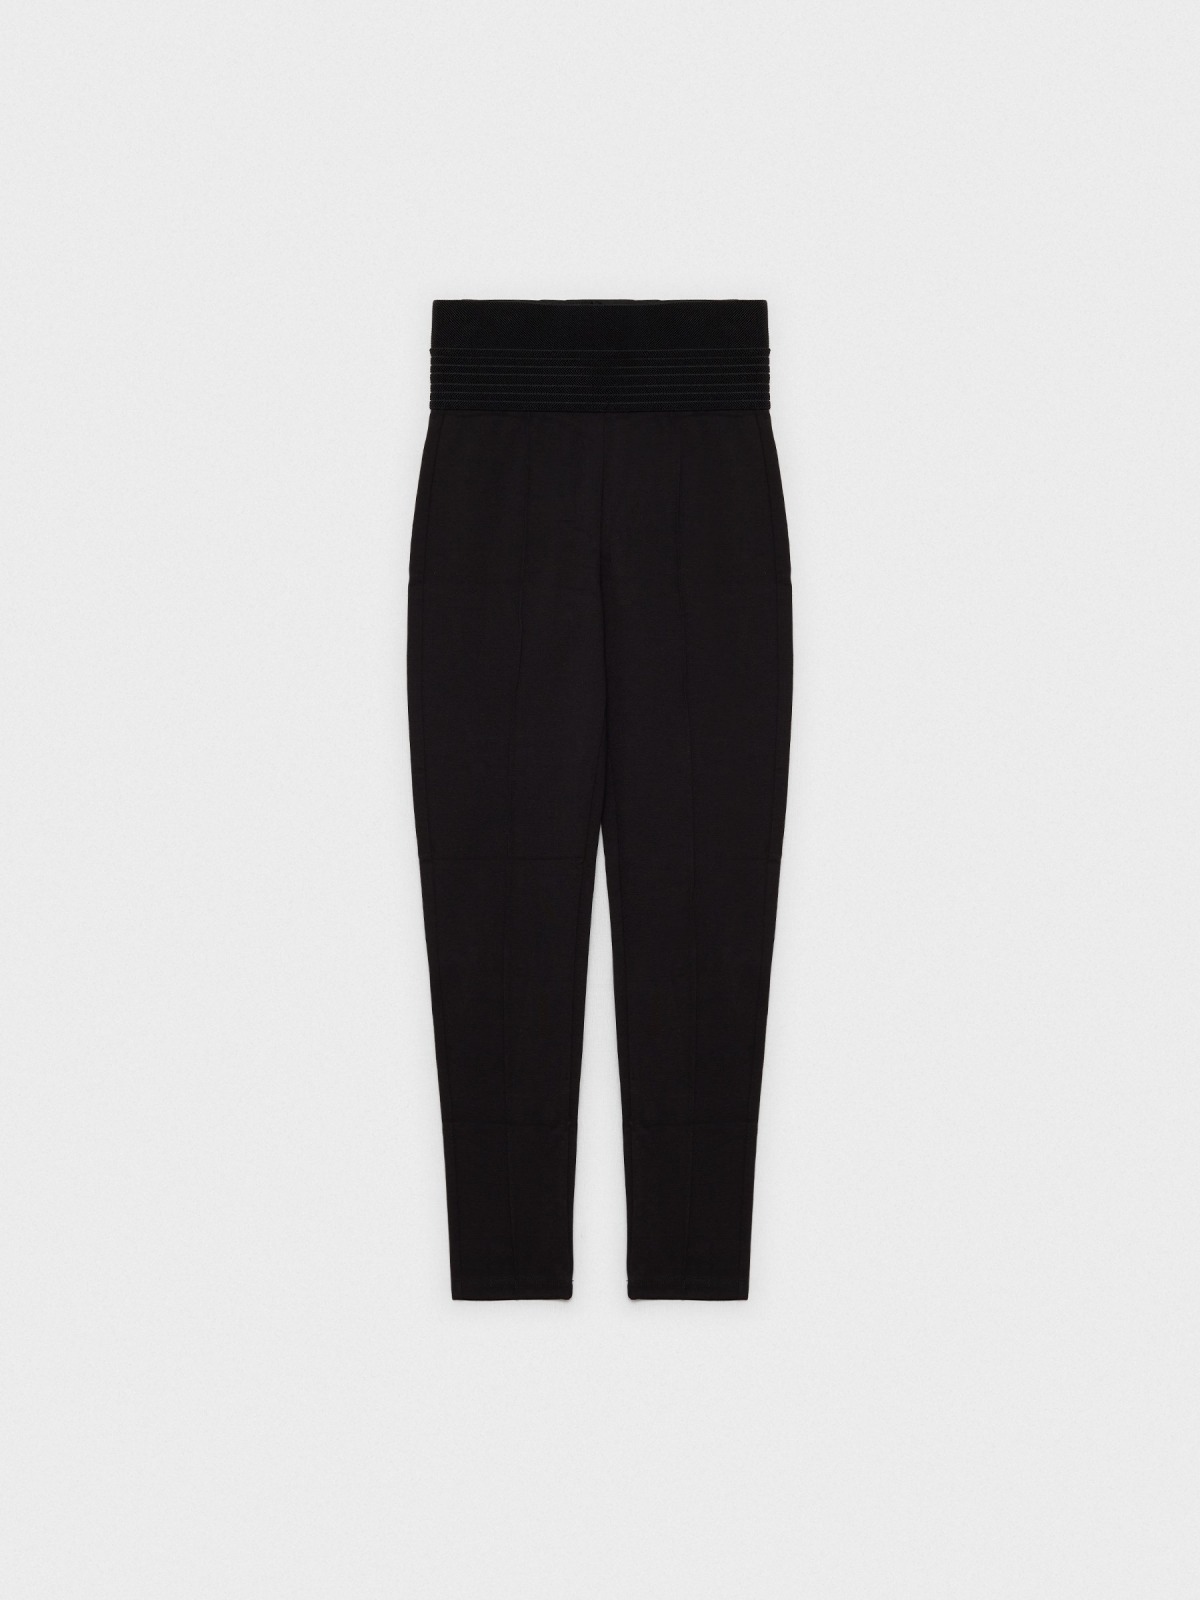  Legging with wide waistband black